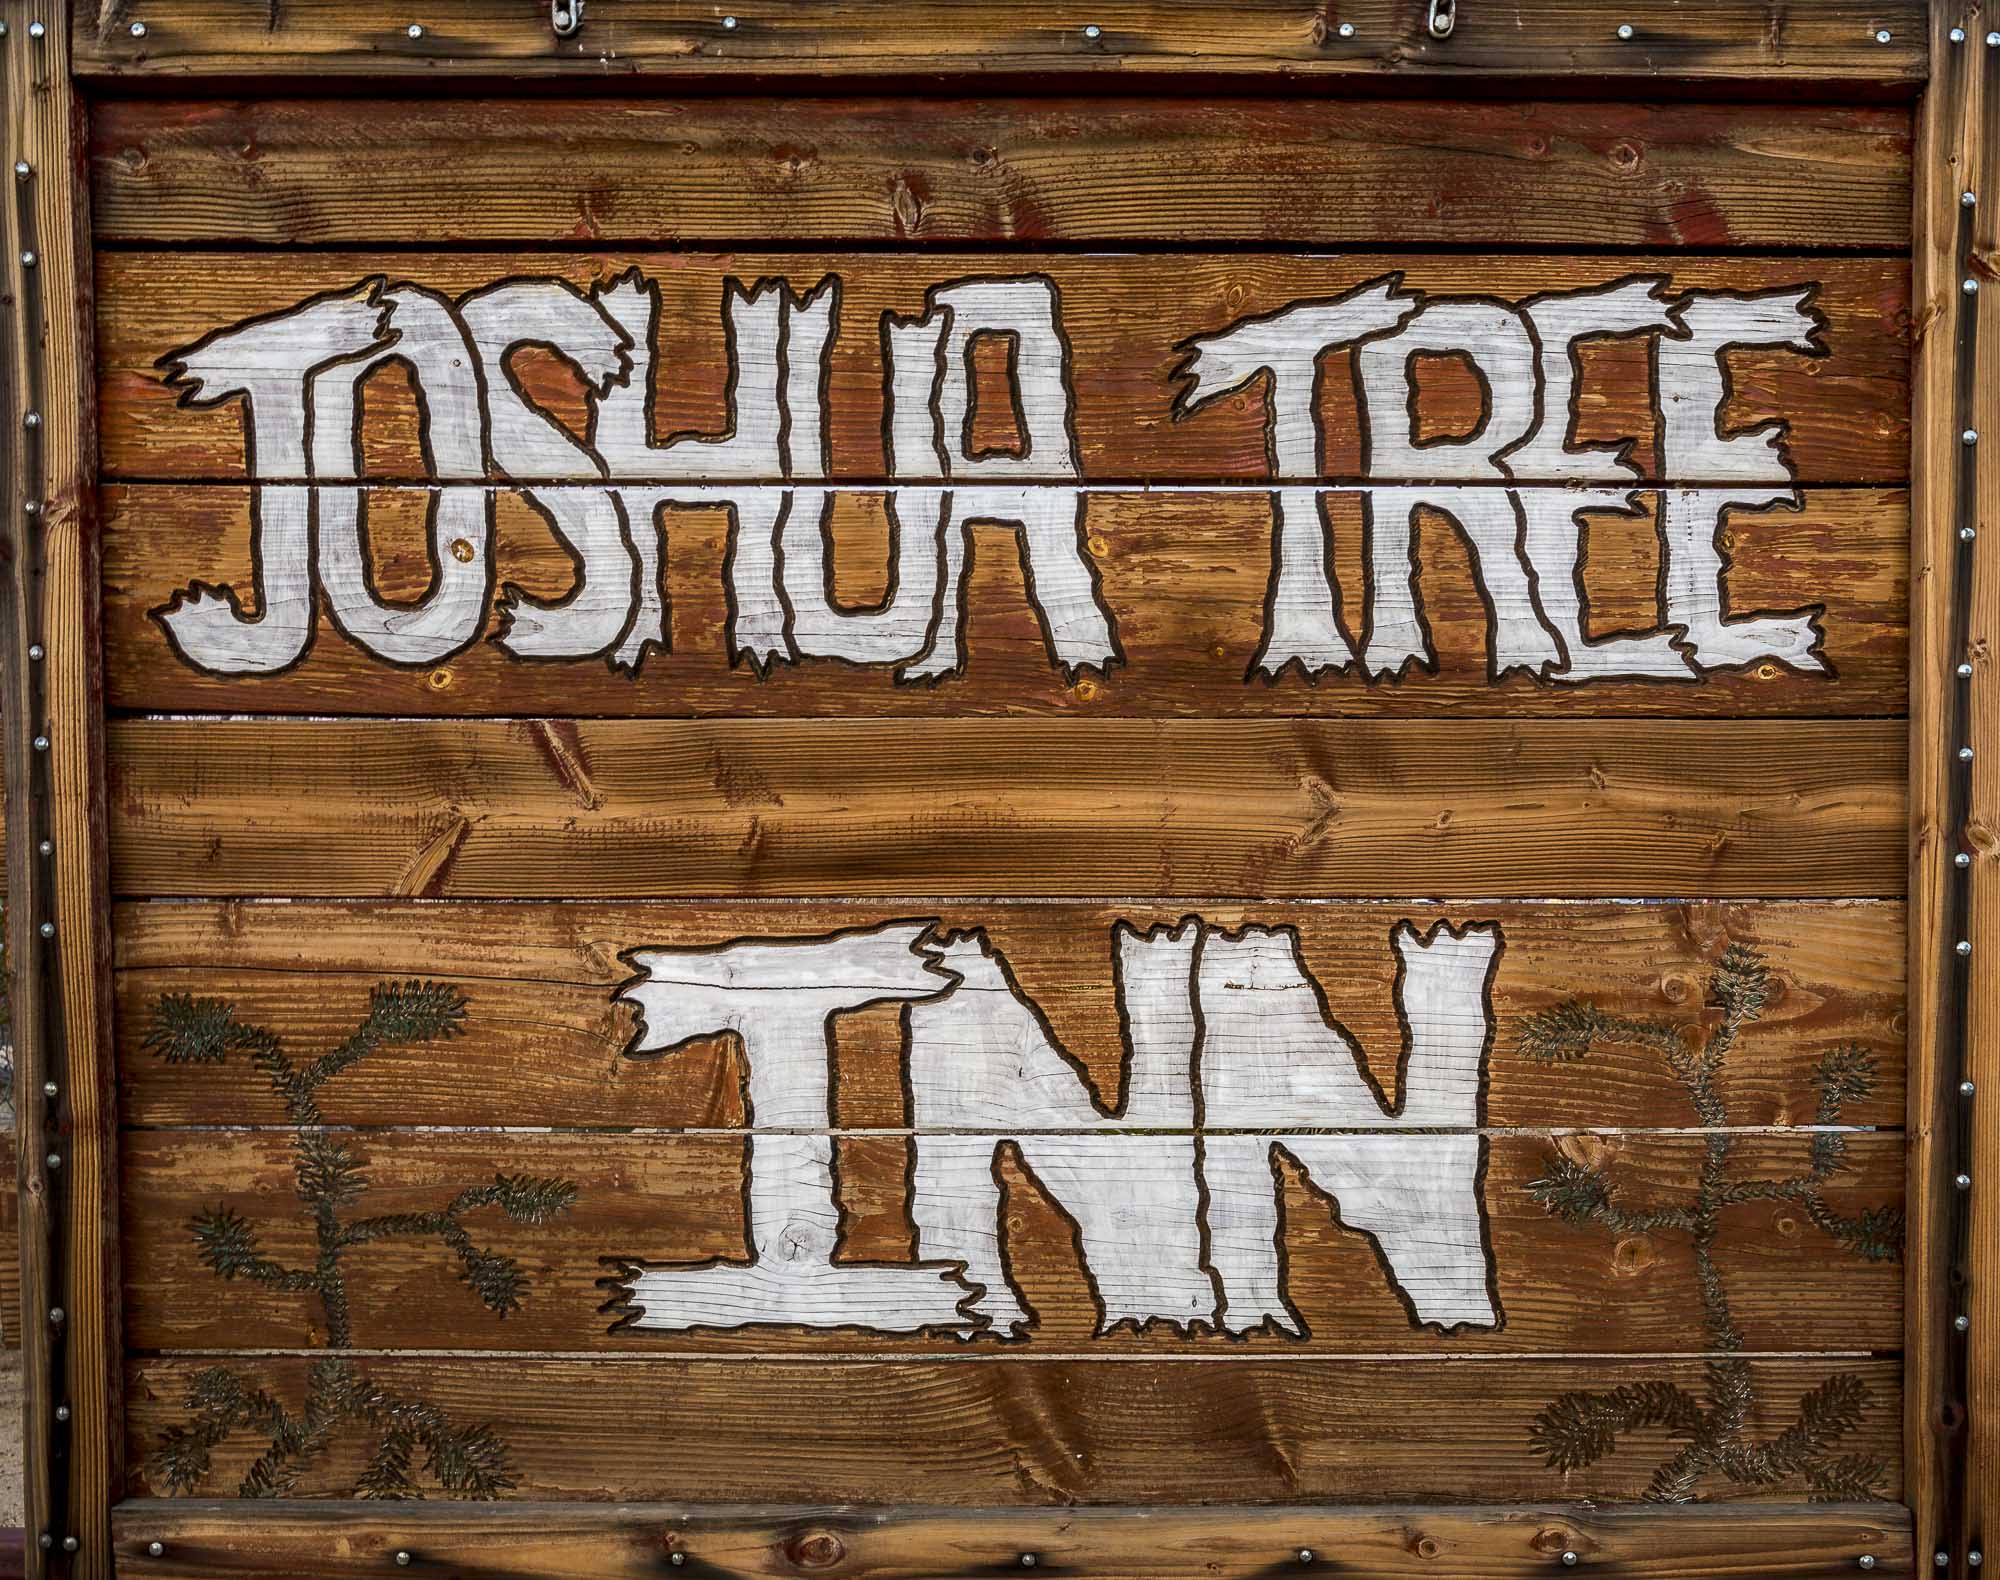 A wooden sign that says joshua tree inn 